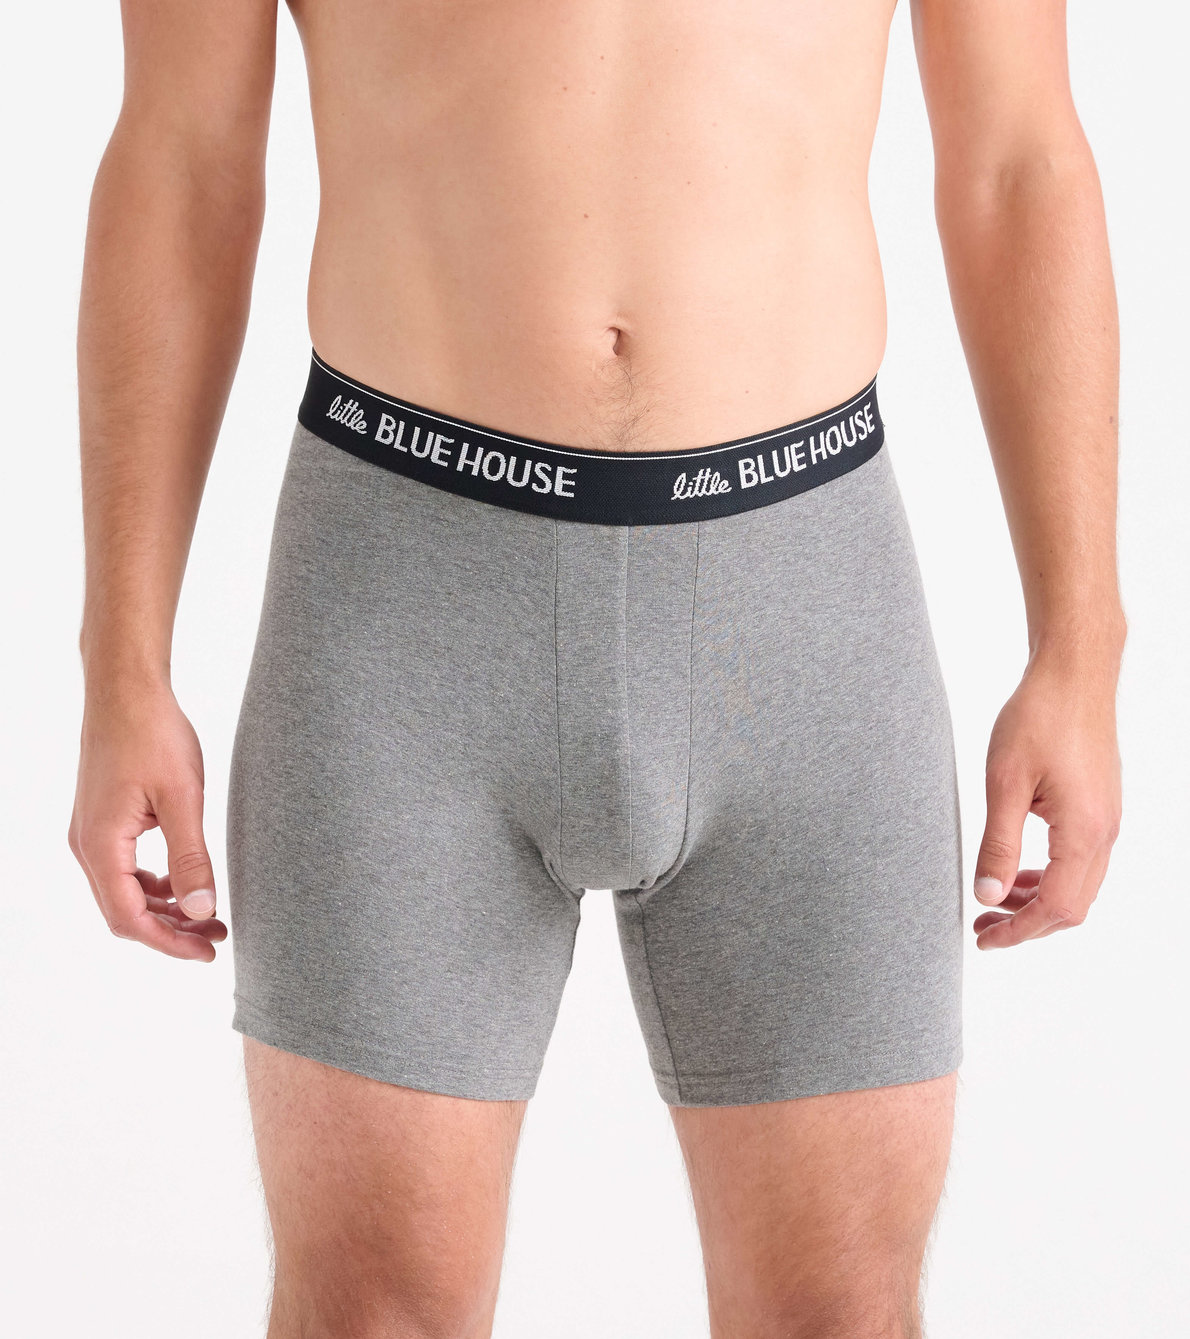 View larger image of Wild Thing Men's Boxer Briefs